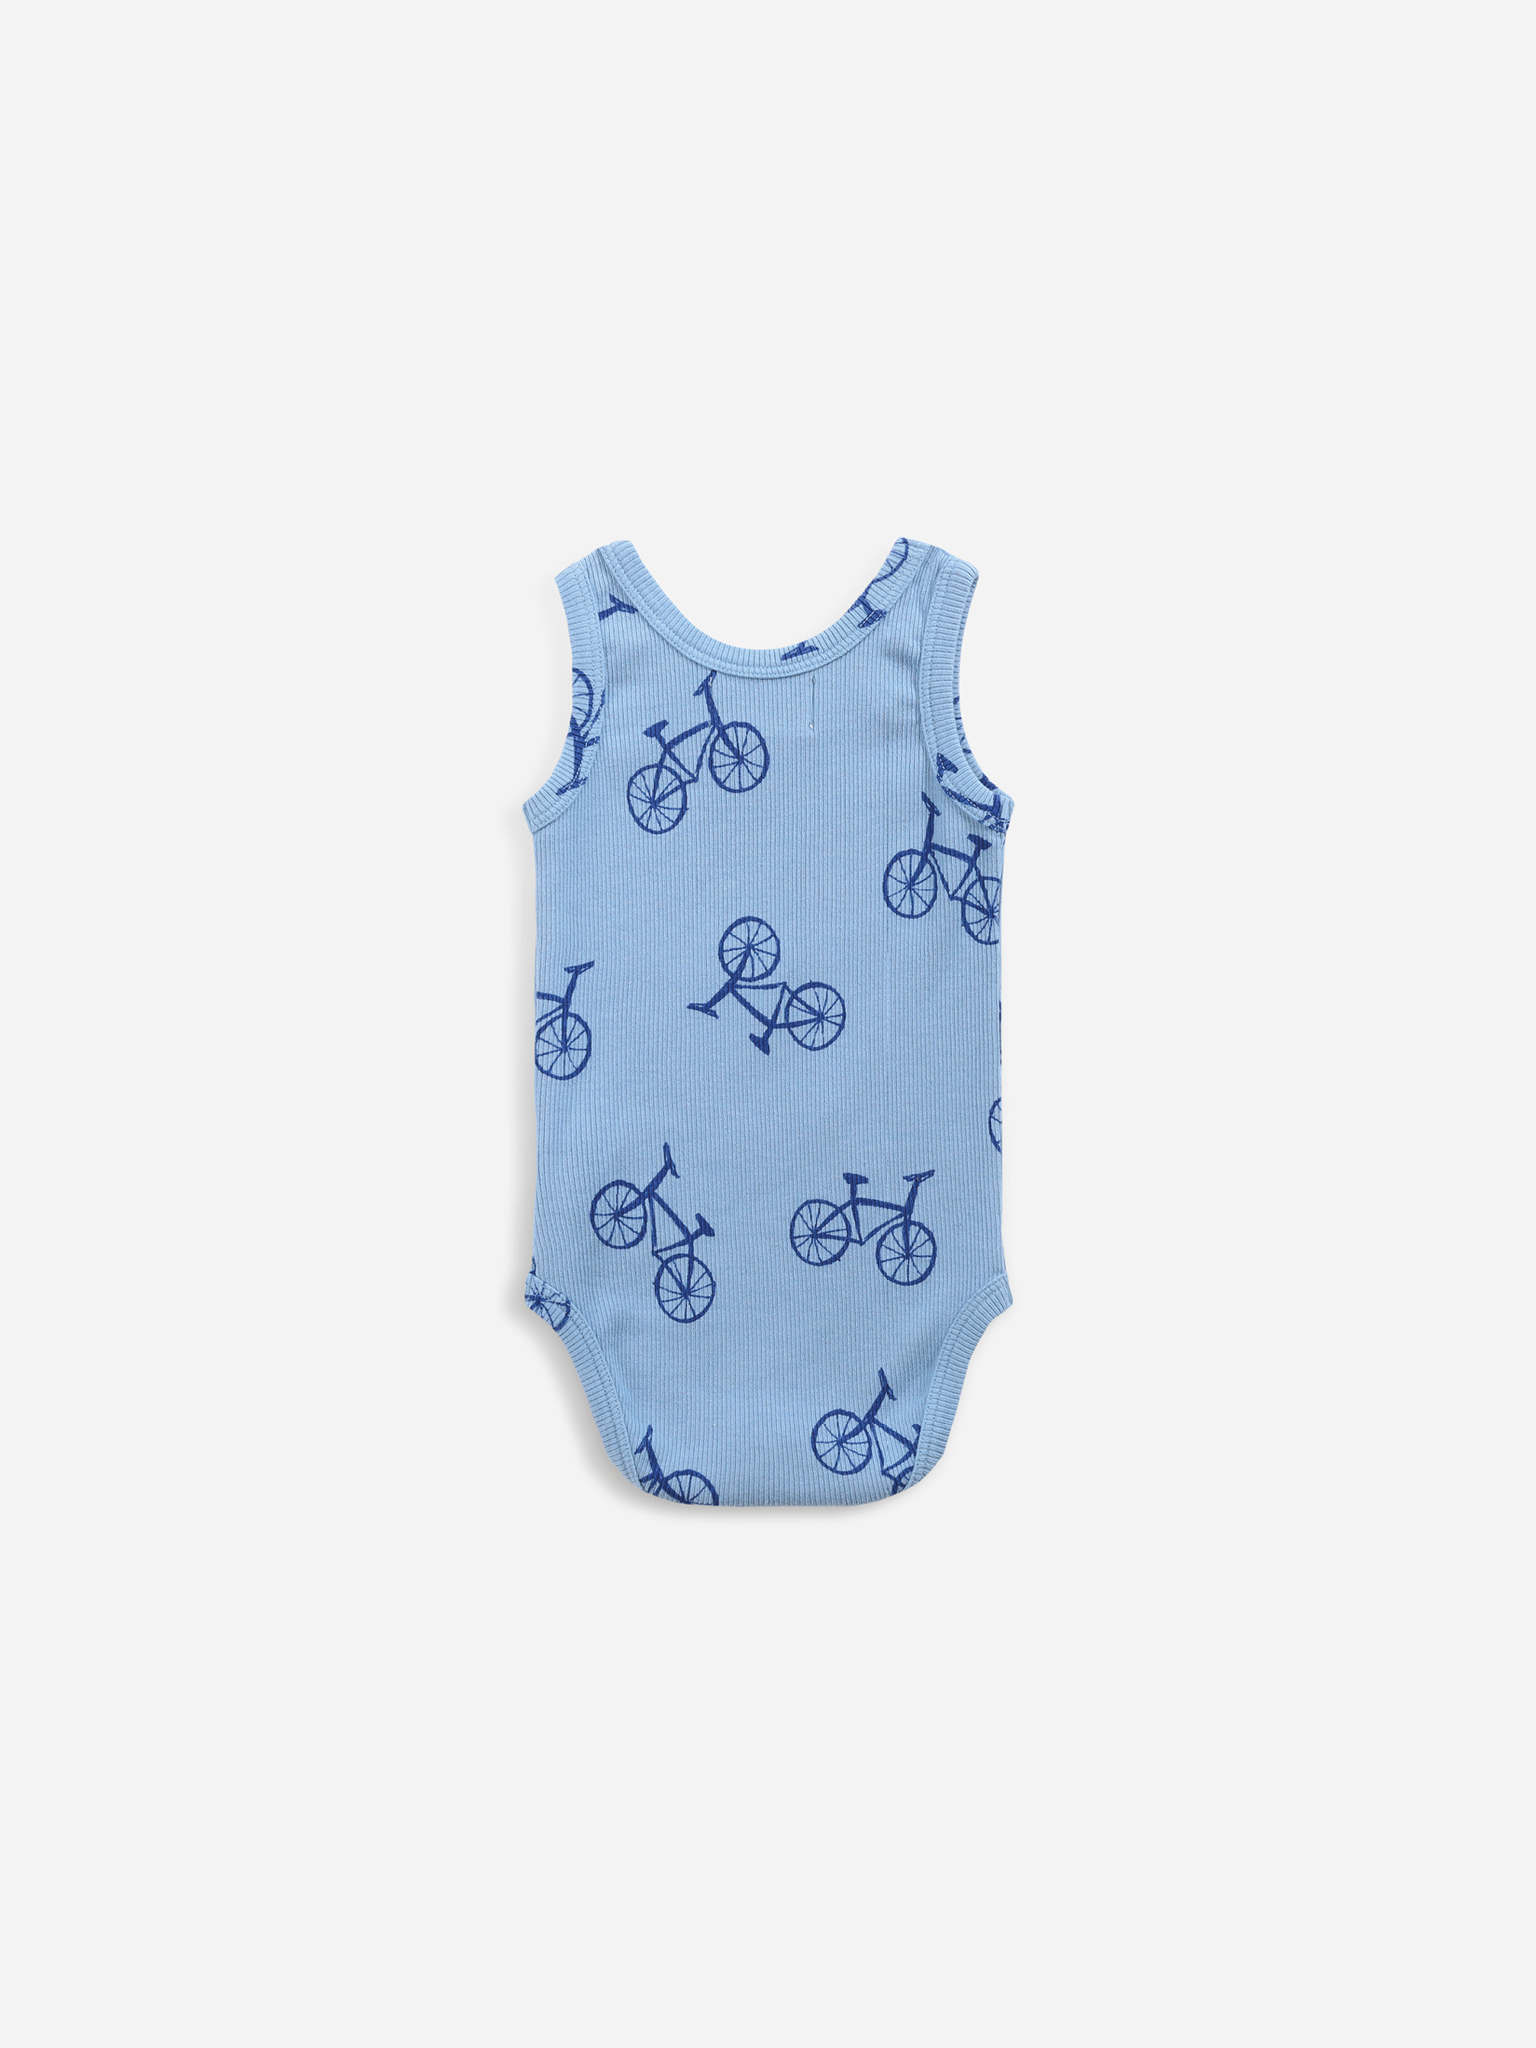 Bobo Choses Bicycle All Over Sleeveless Body